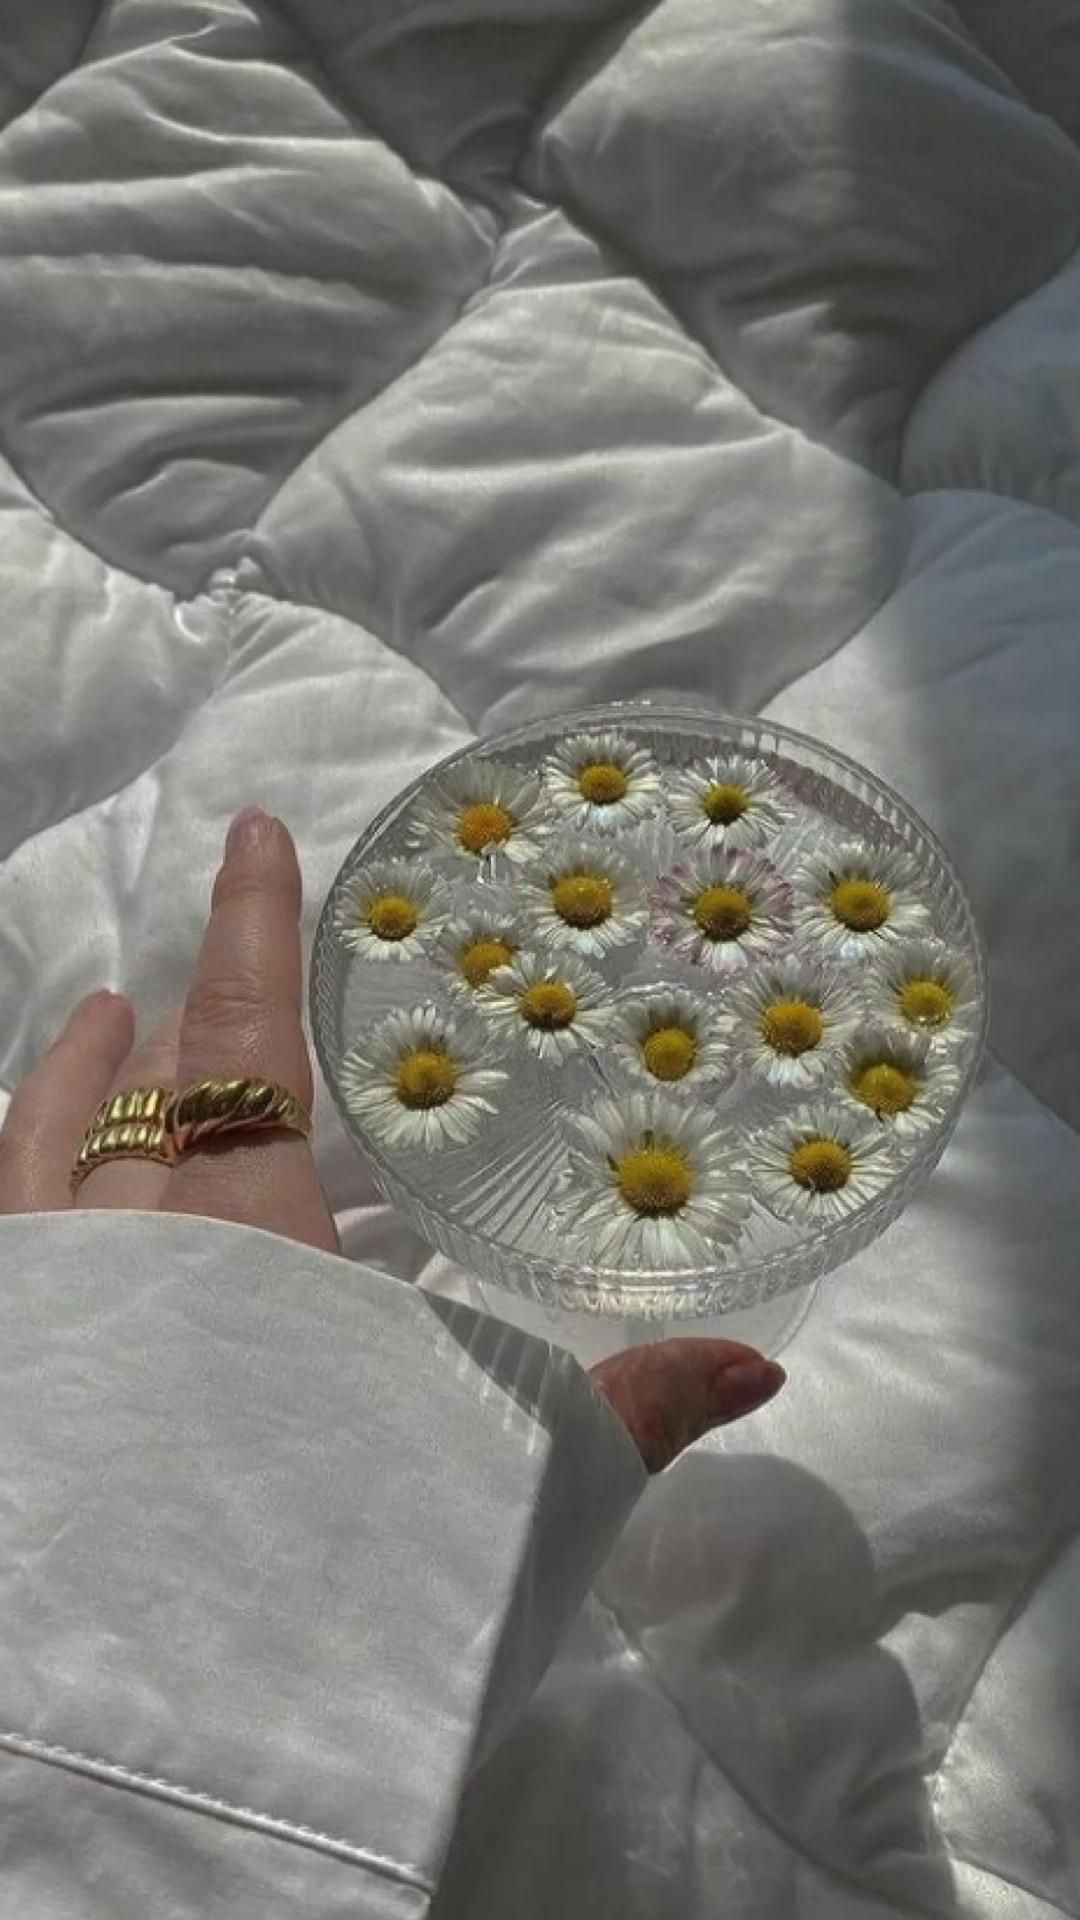 A hand with a gold ring holding a glass bowl of daisies. - Clean